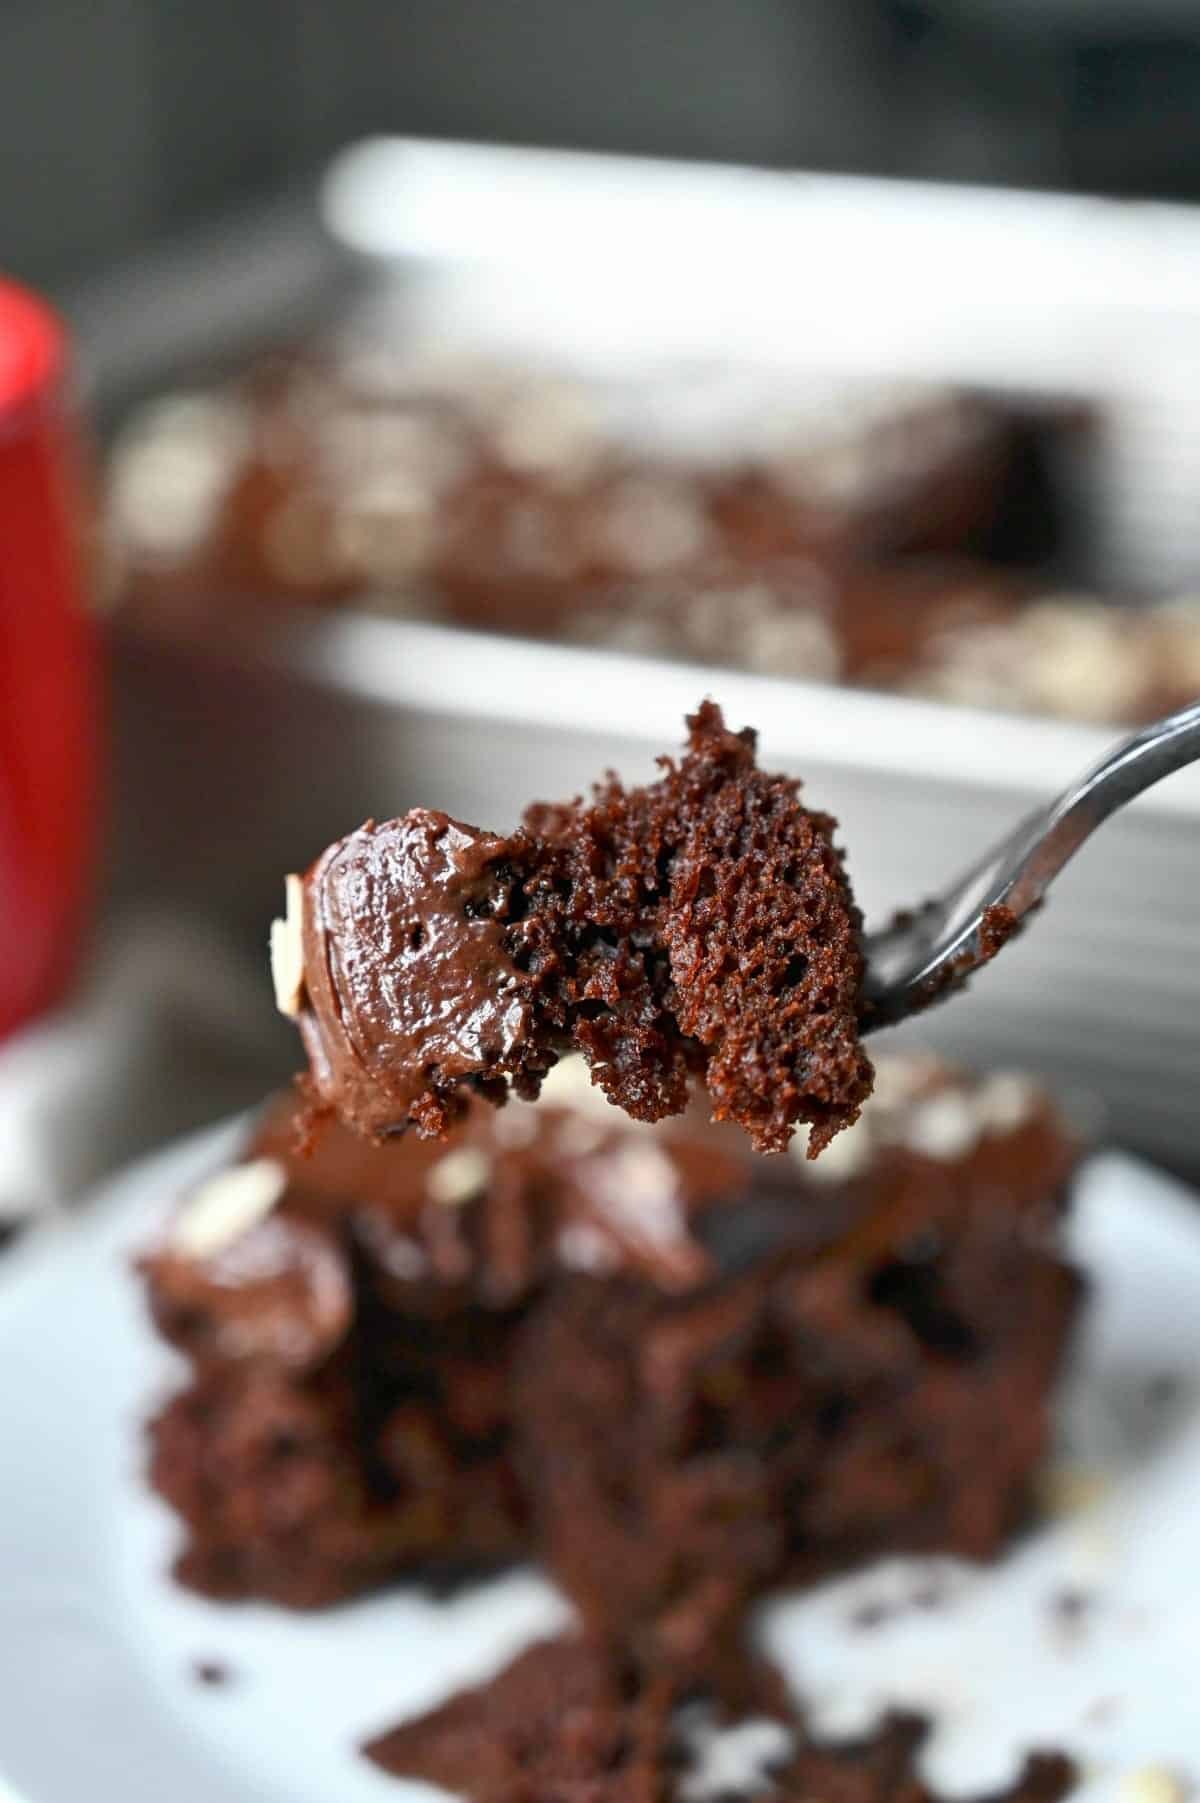 A bite of chocolate cake with ganache frosting on a fork.